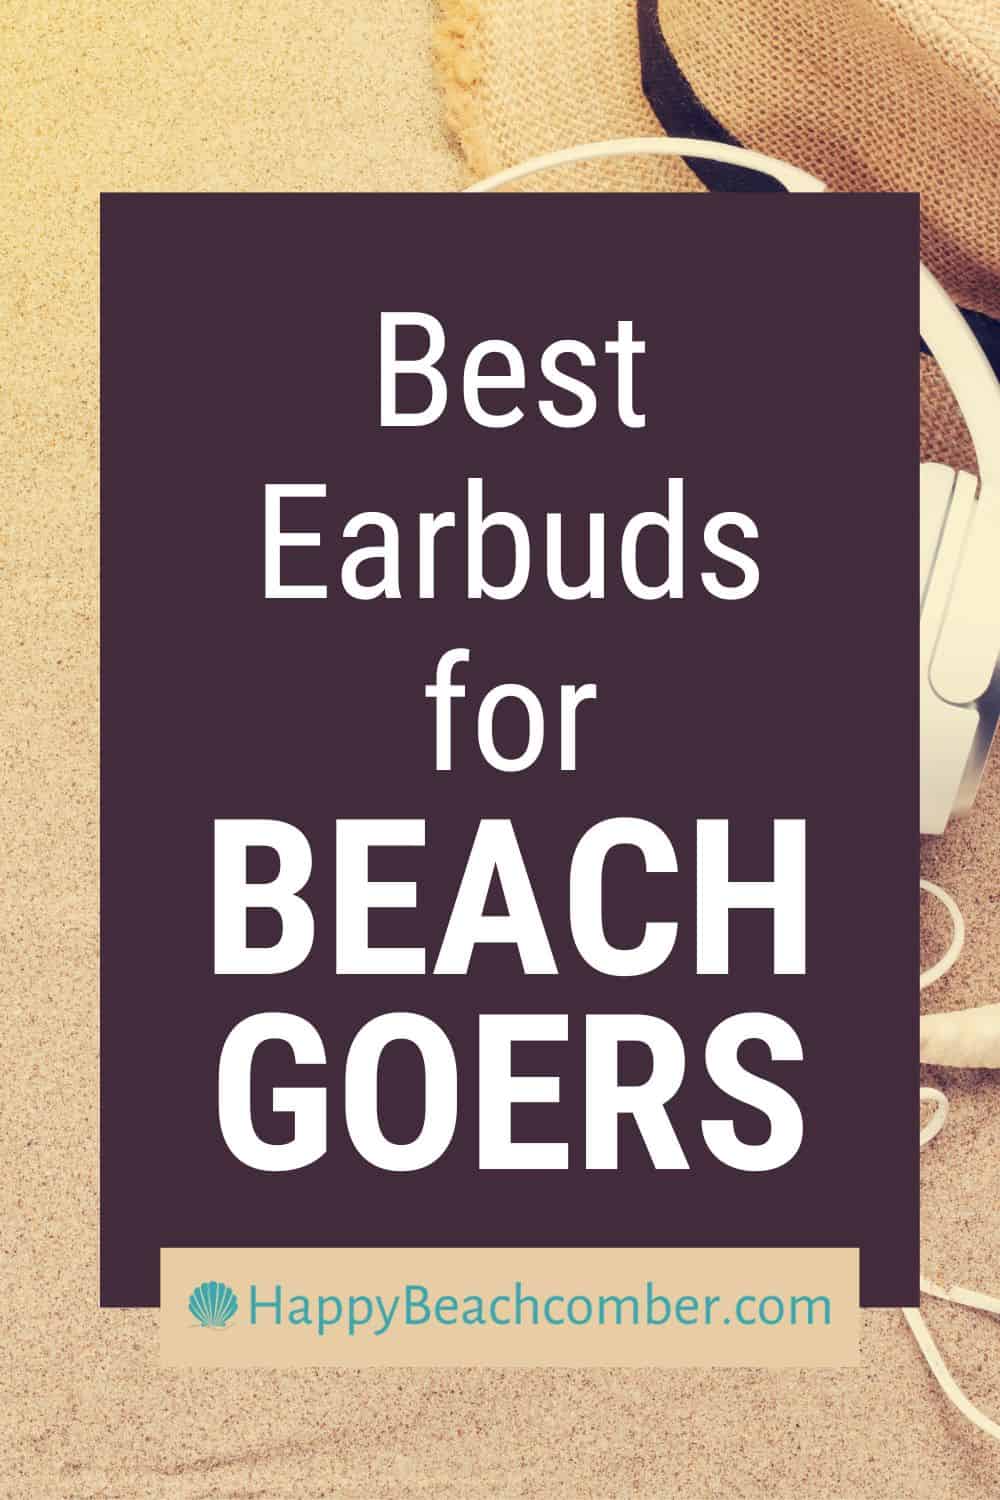 Best Earbuds for Beach Goers